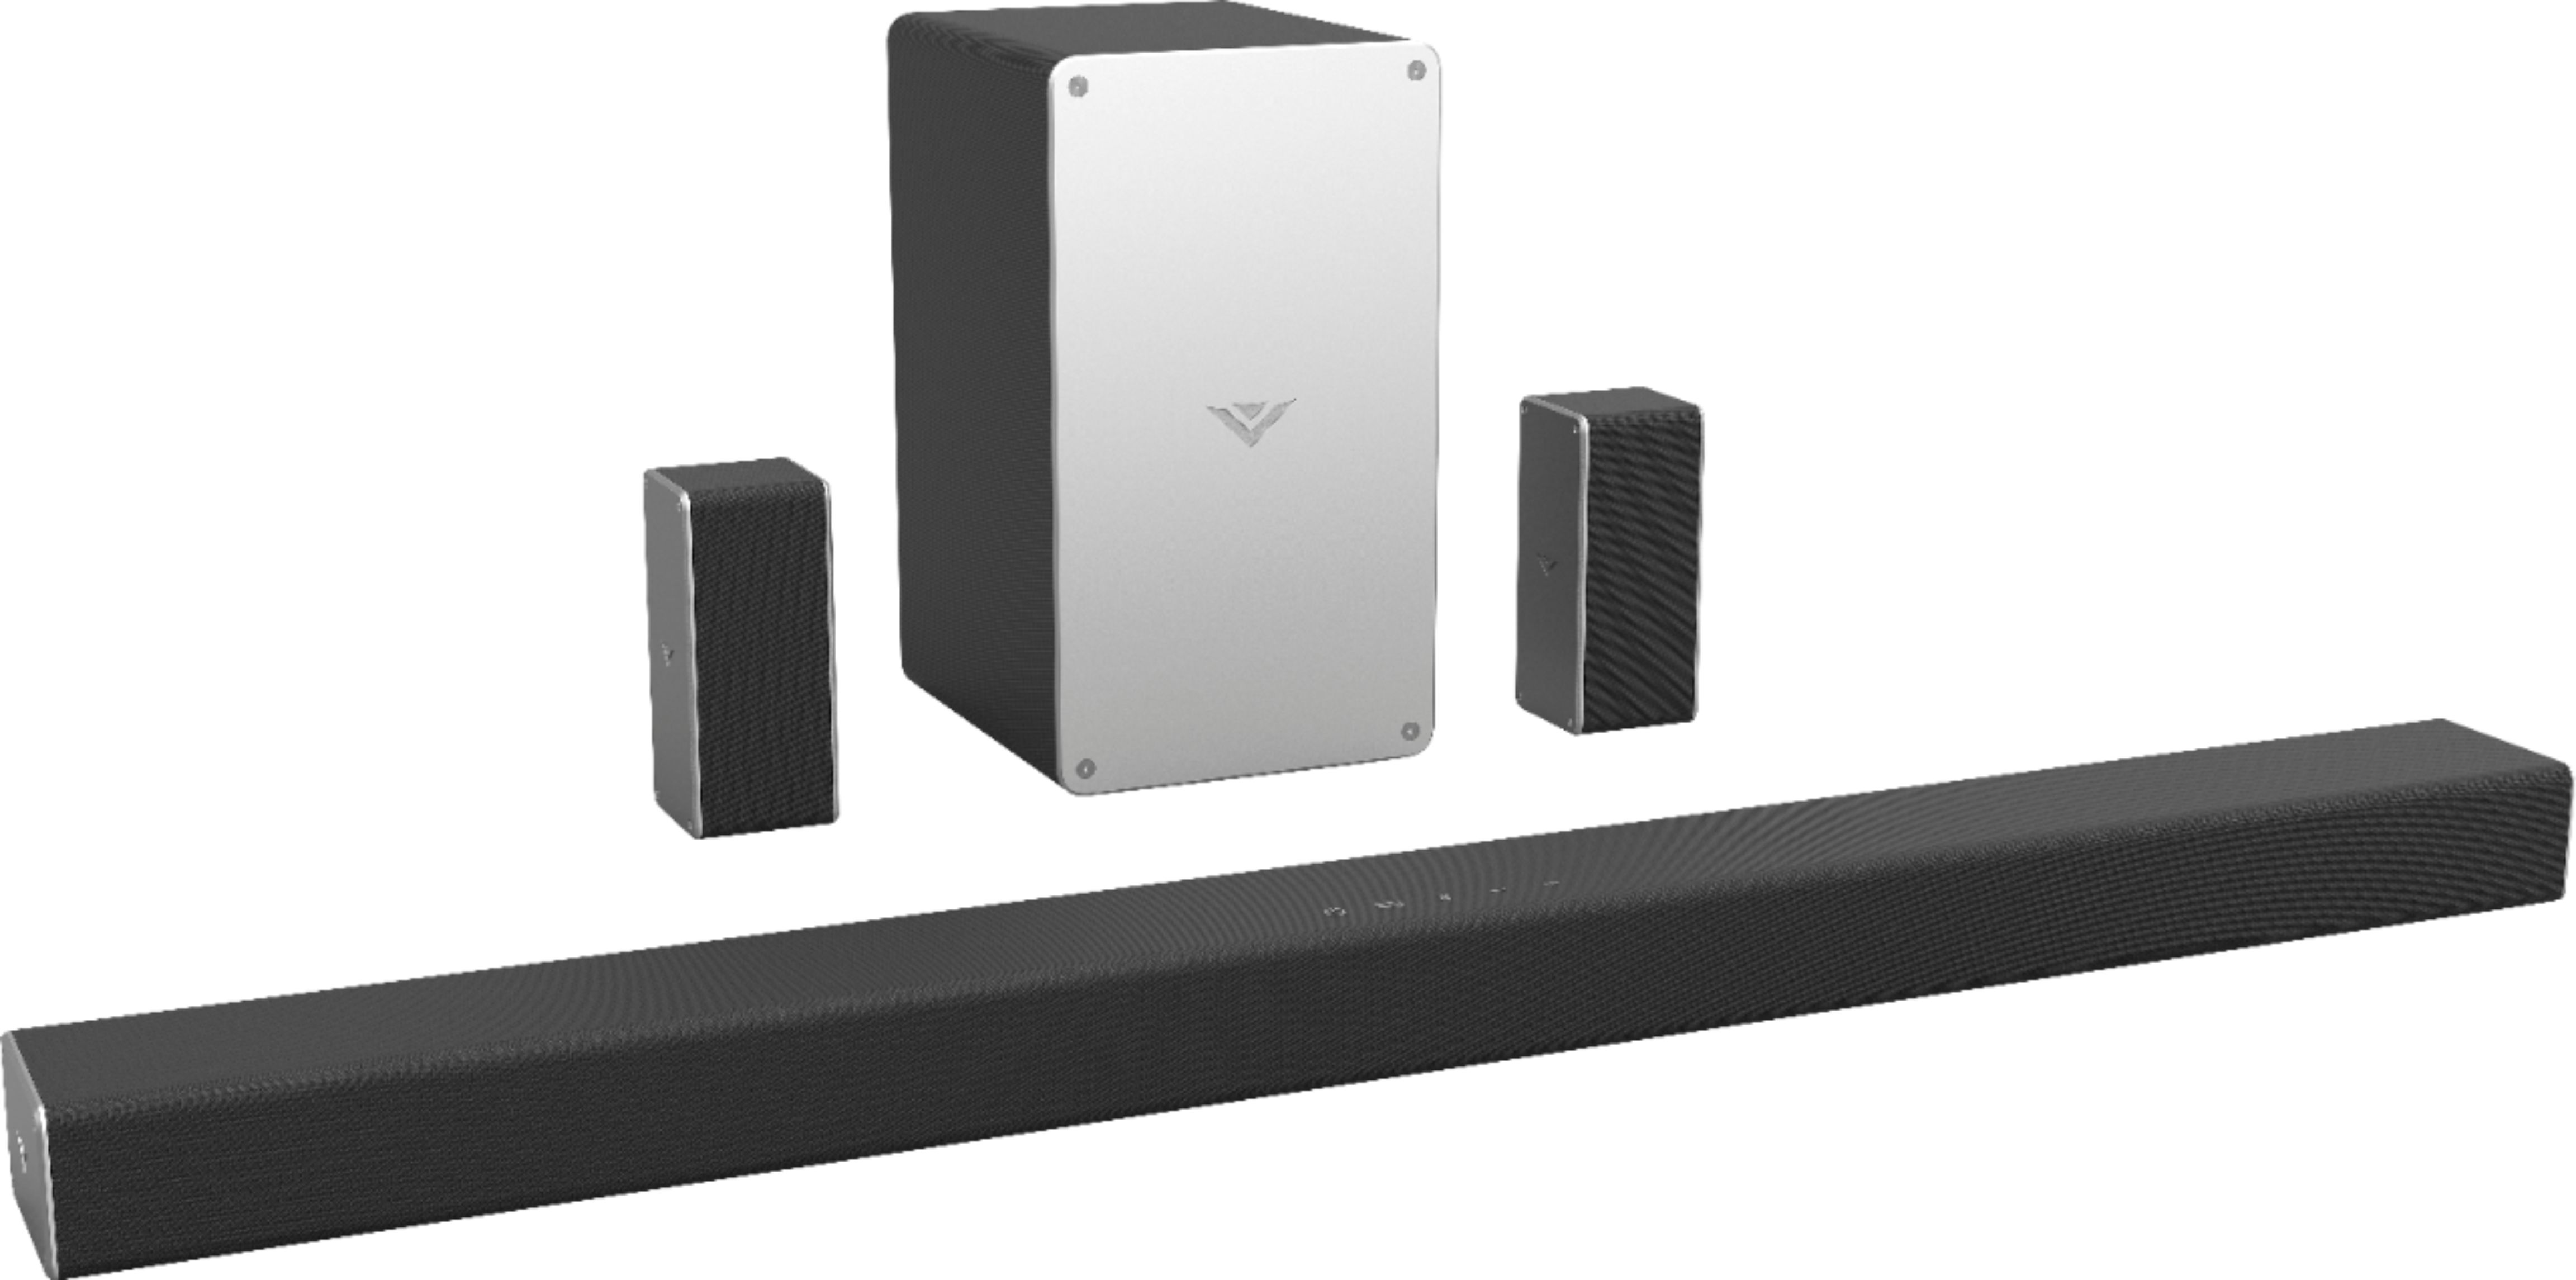 How to Troubleshoot Vizio Subwoofer Pairing Issues? 9